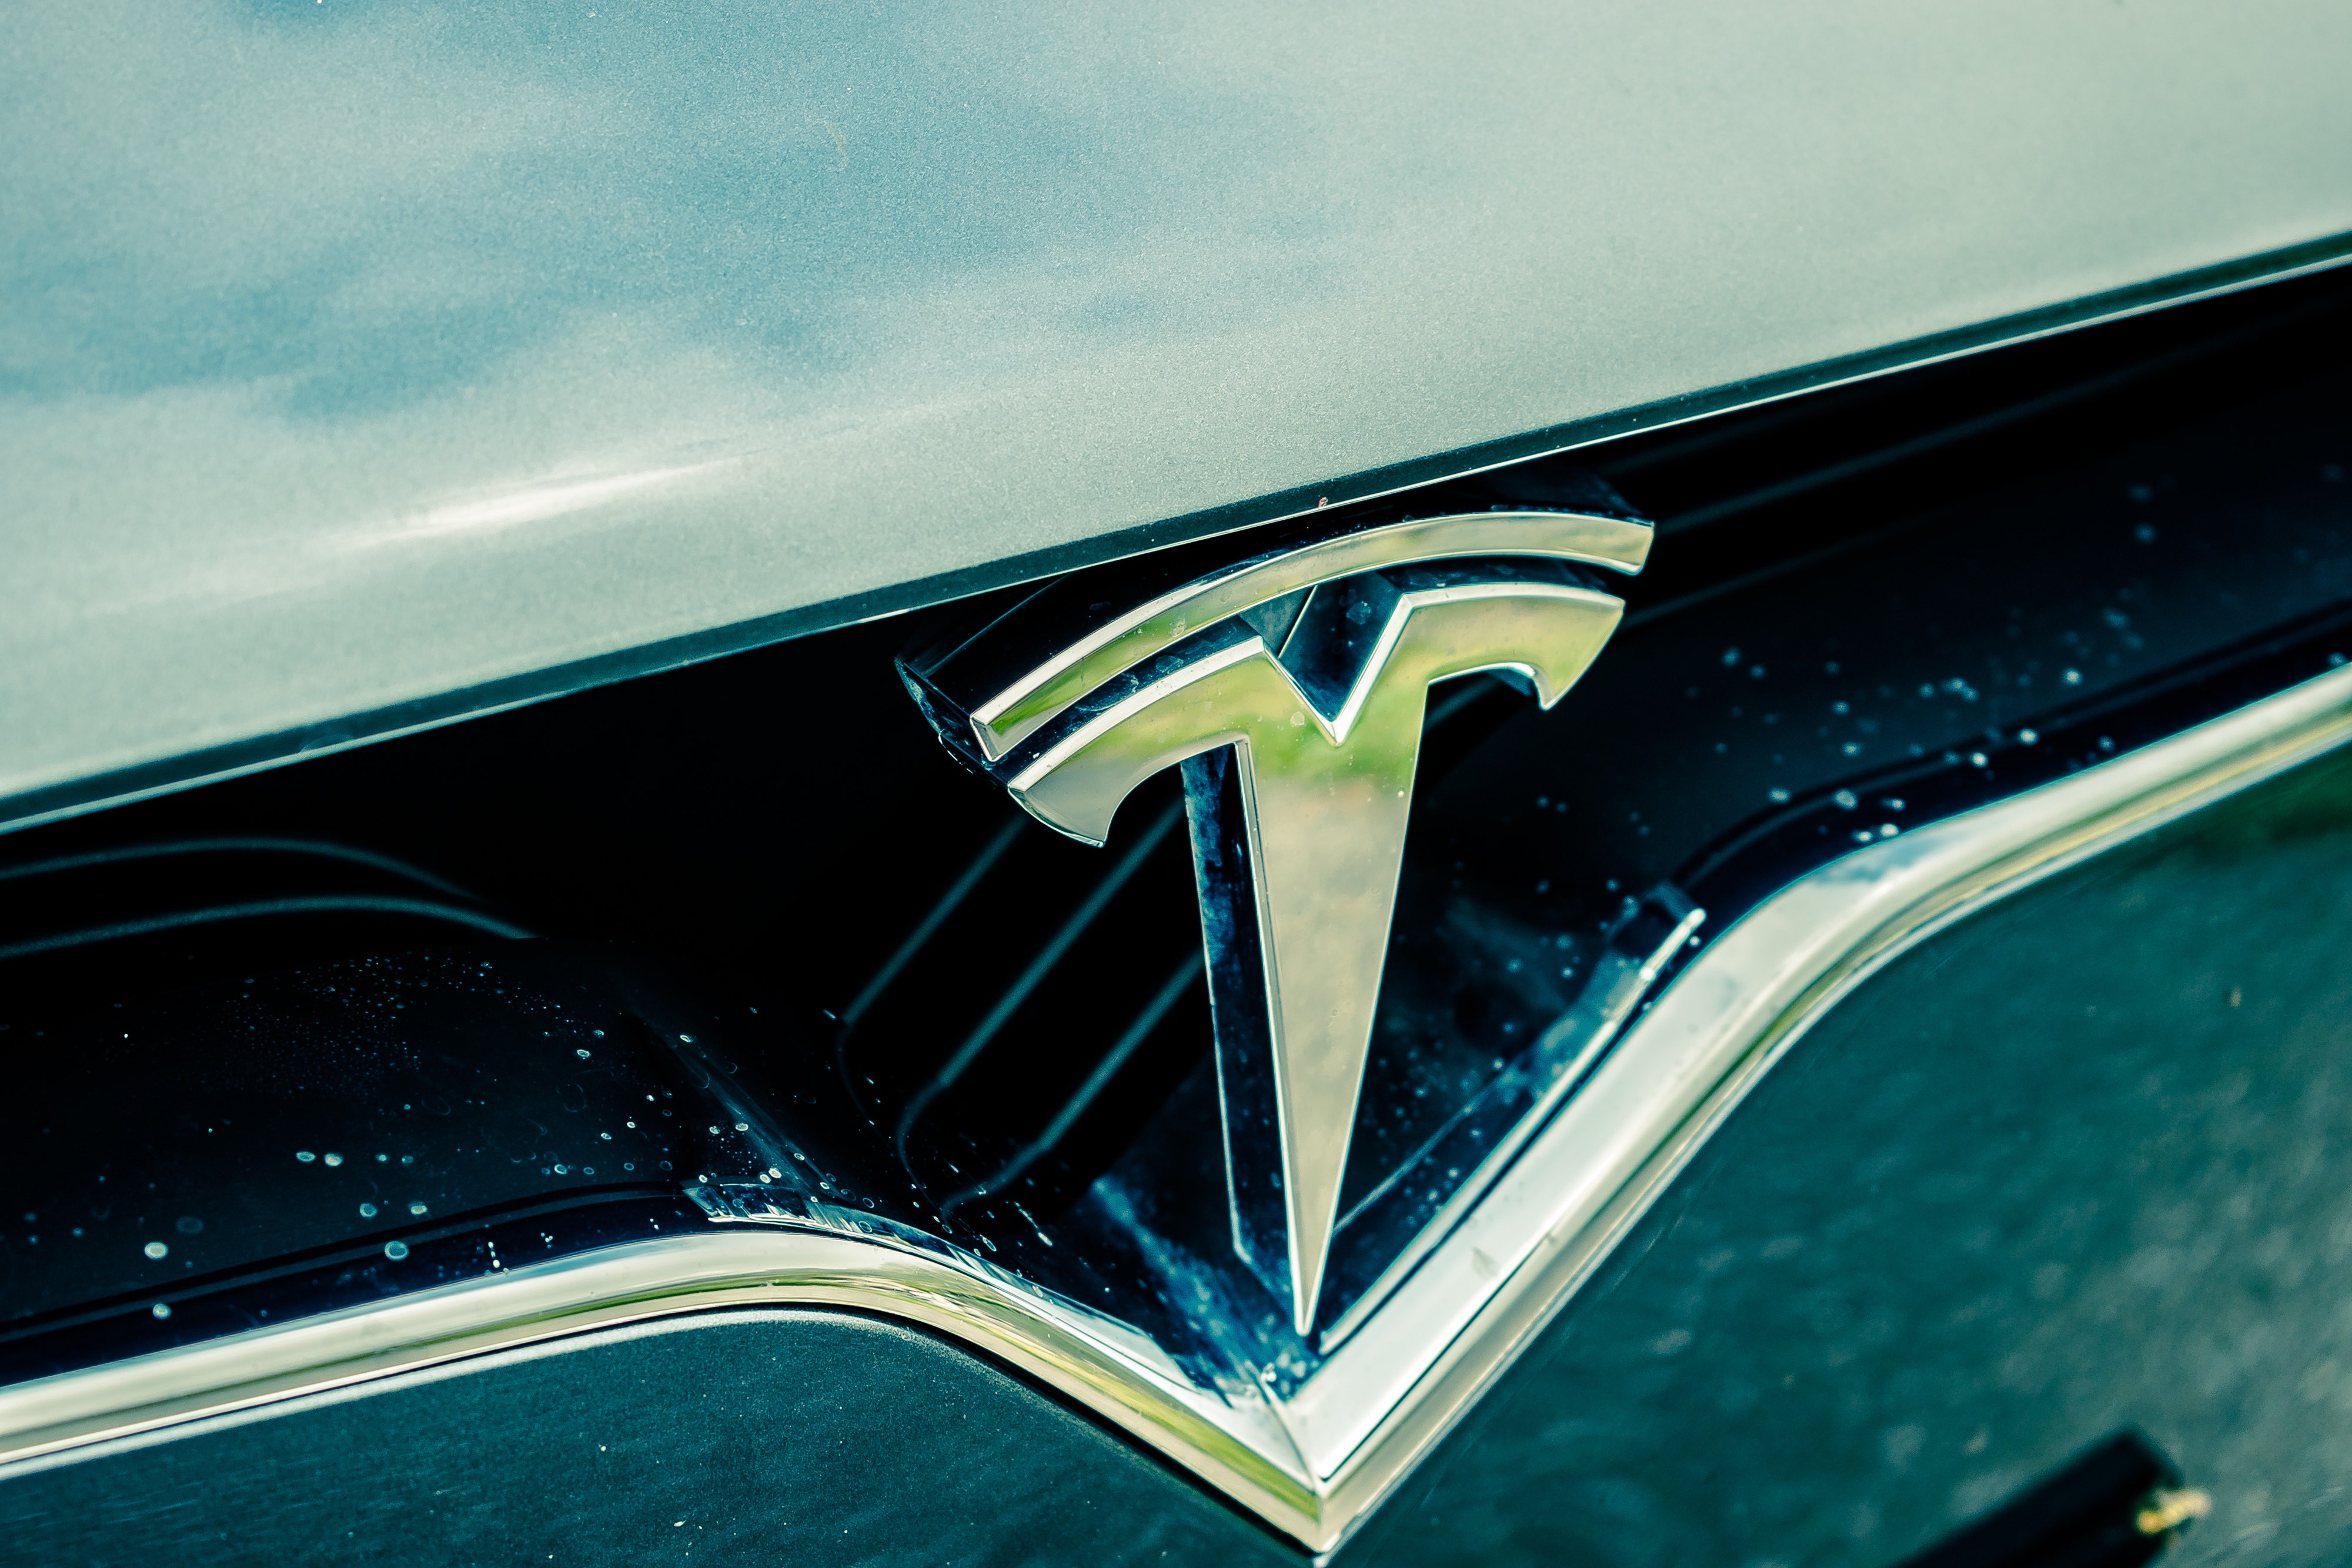 Benzinga Before The Bell: Tesla Sues Louisiana Automobile Dealers Association, Will iPhone 14 Feature Satellite Connectivity?, Netflix Denies $7 To $9 Ad-Supported Plan And Other Top Financial Stories Tuesday, August 30